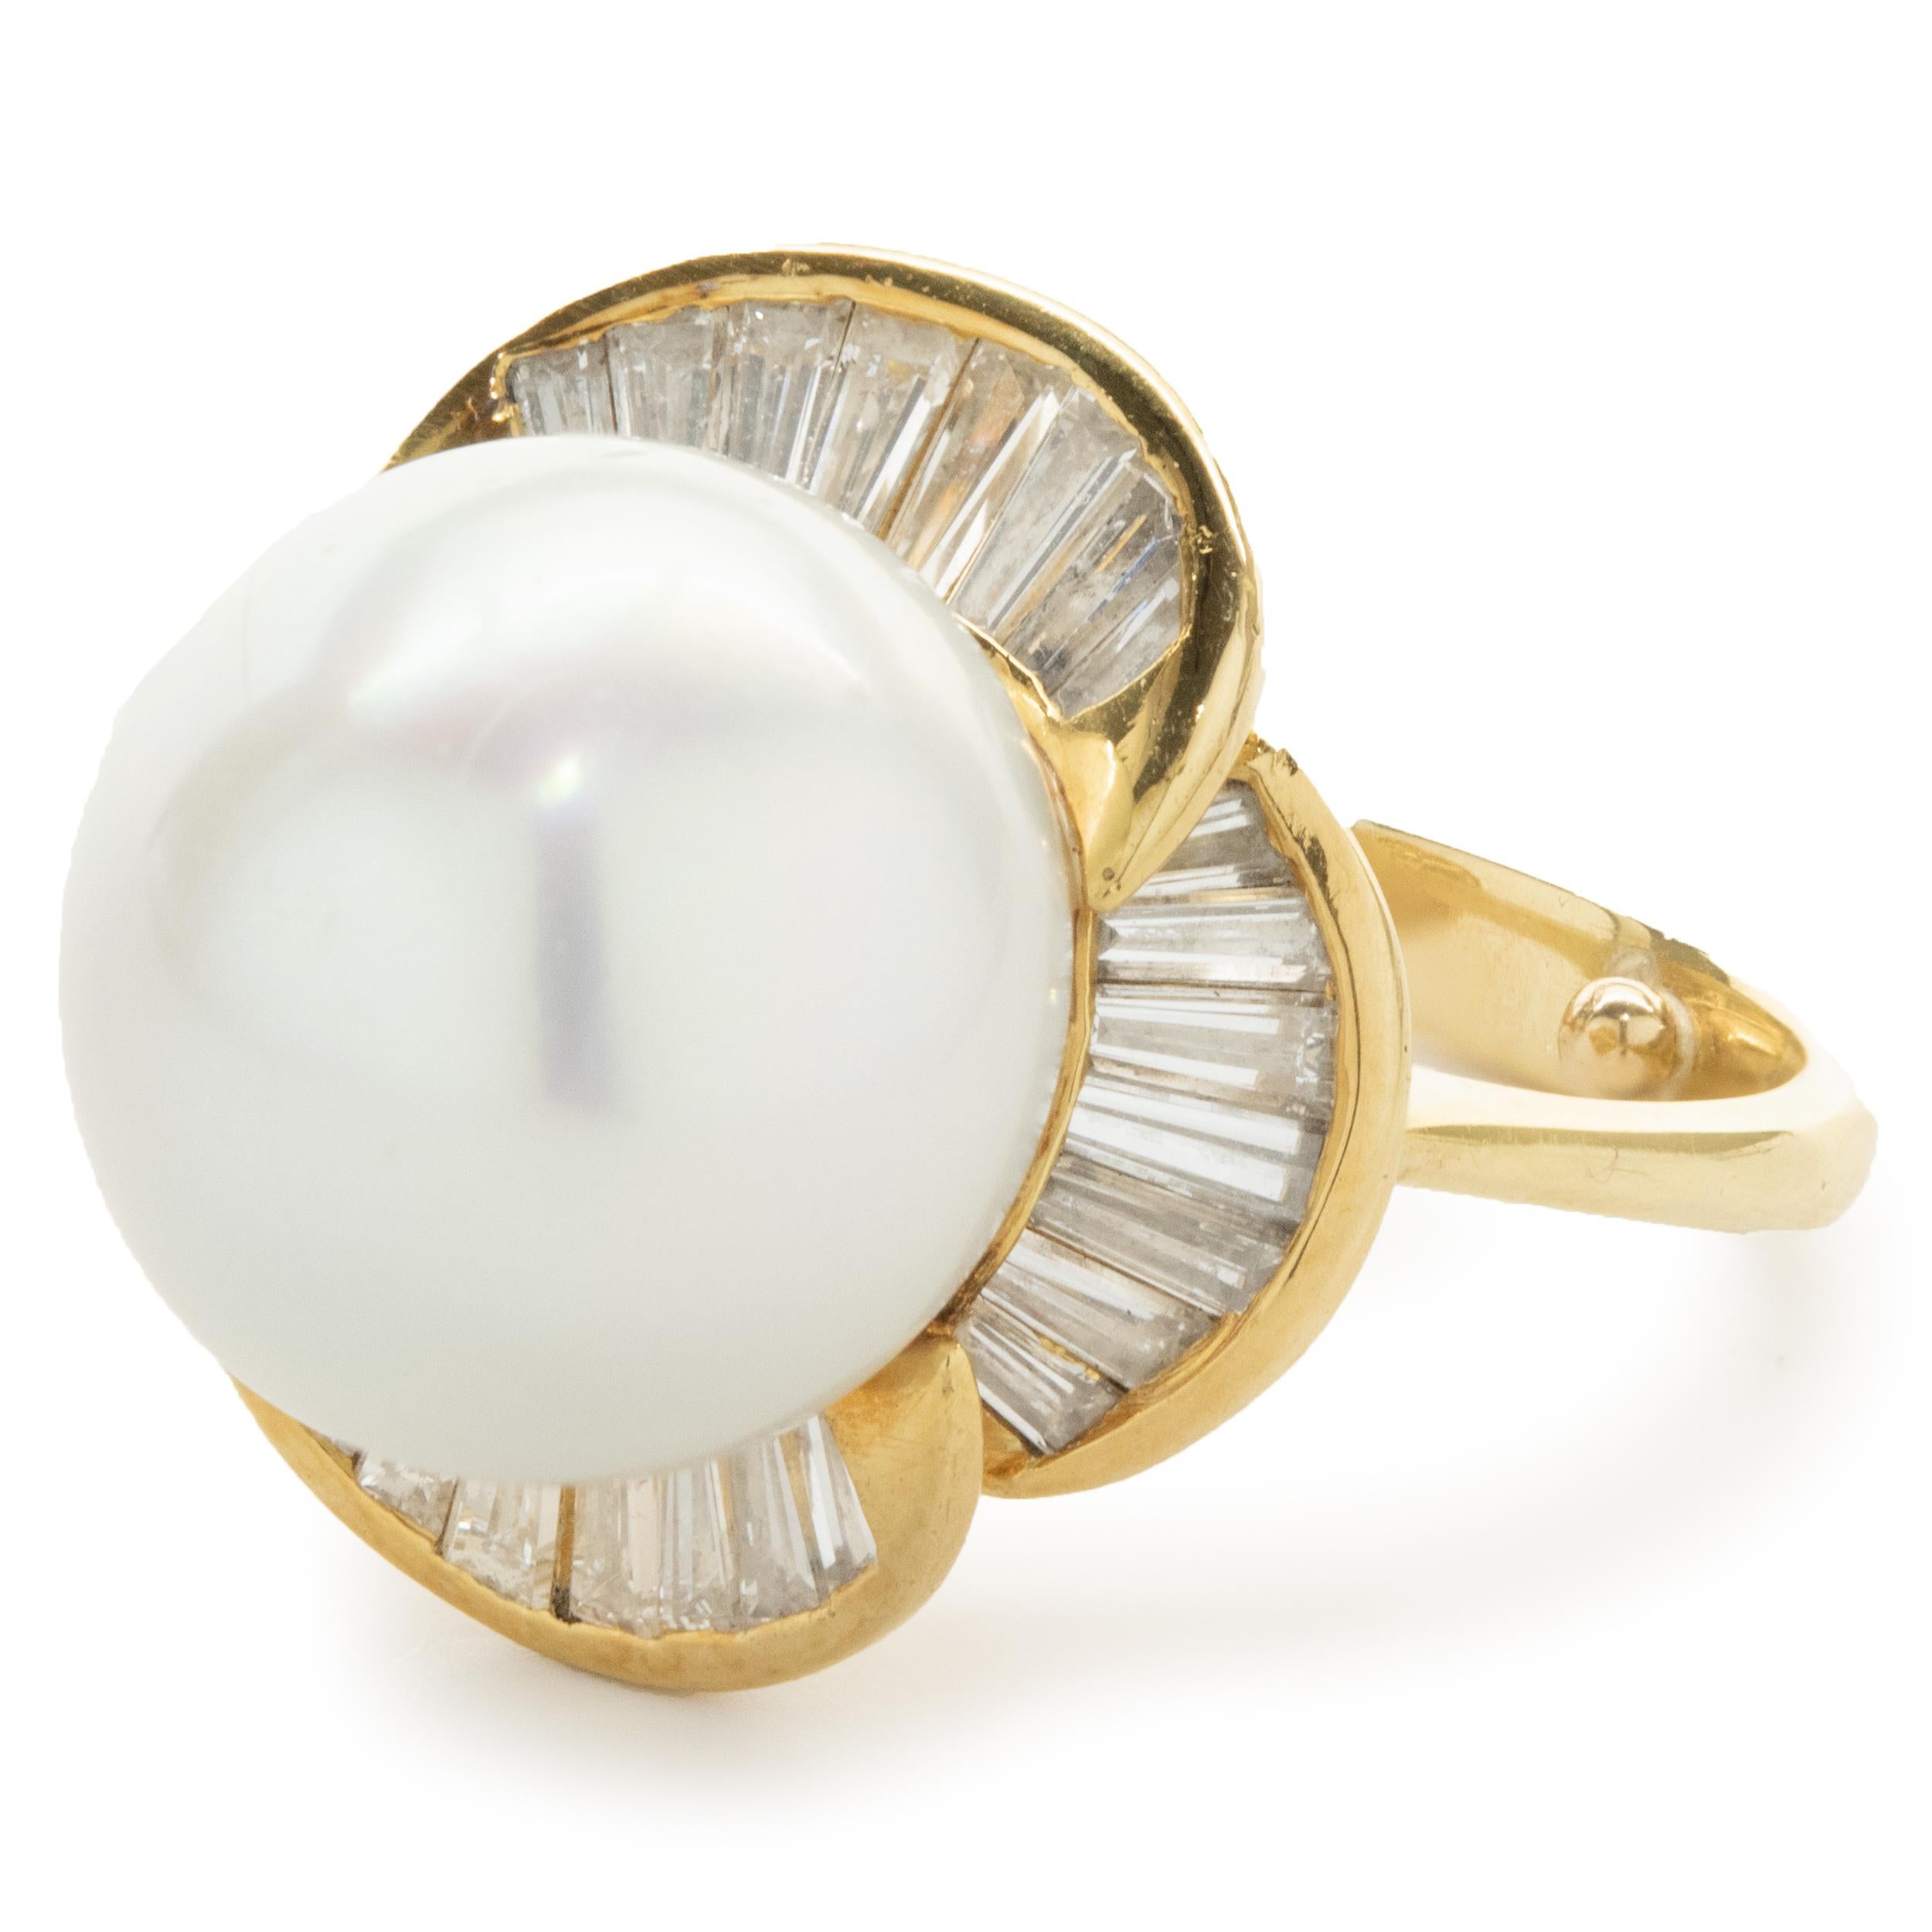 Designer: custom design
Material: 18k yellow gold
South Sea Pearl: 14MM 
Diamond: 30 baguette cut = 1.75cttw
Color: G
Clarity: SI1
Ring Size: 6 (please allow two additional shipping days for sizing requests)
Dimensions: ring top measures